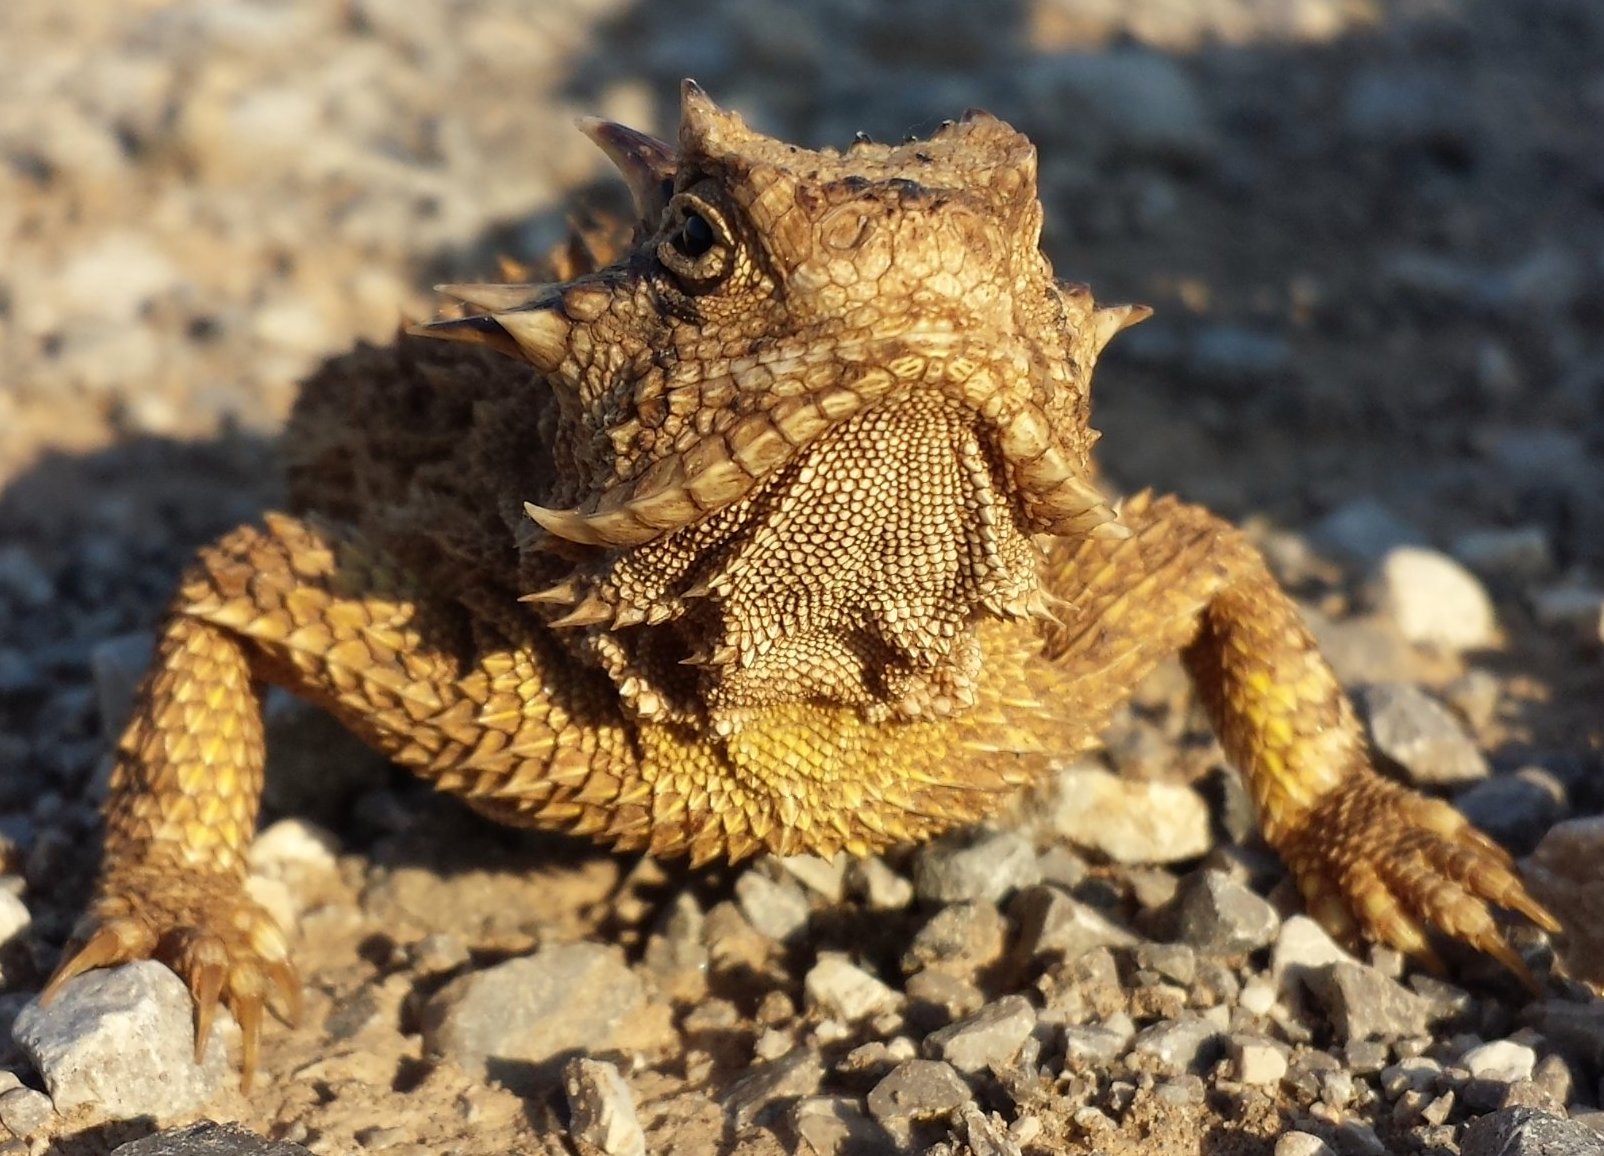 Ed Brickell: The Horned Toads Confront Their Young Human Captors